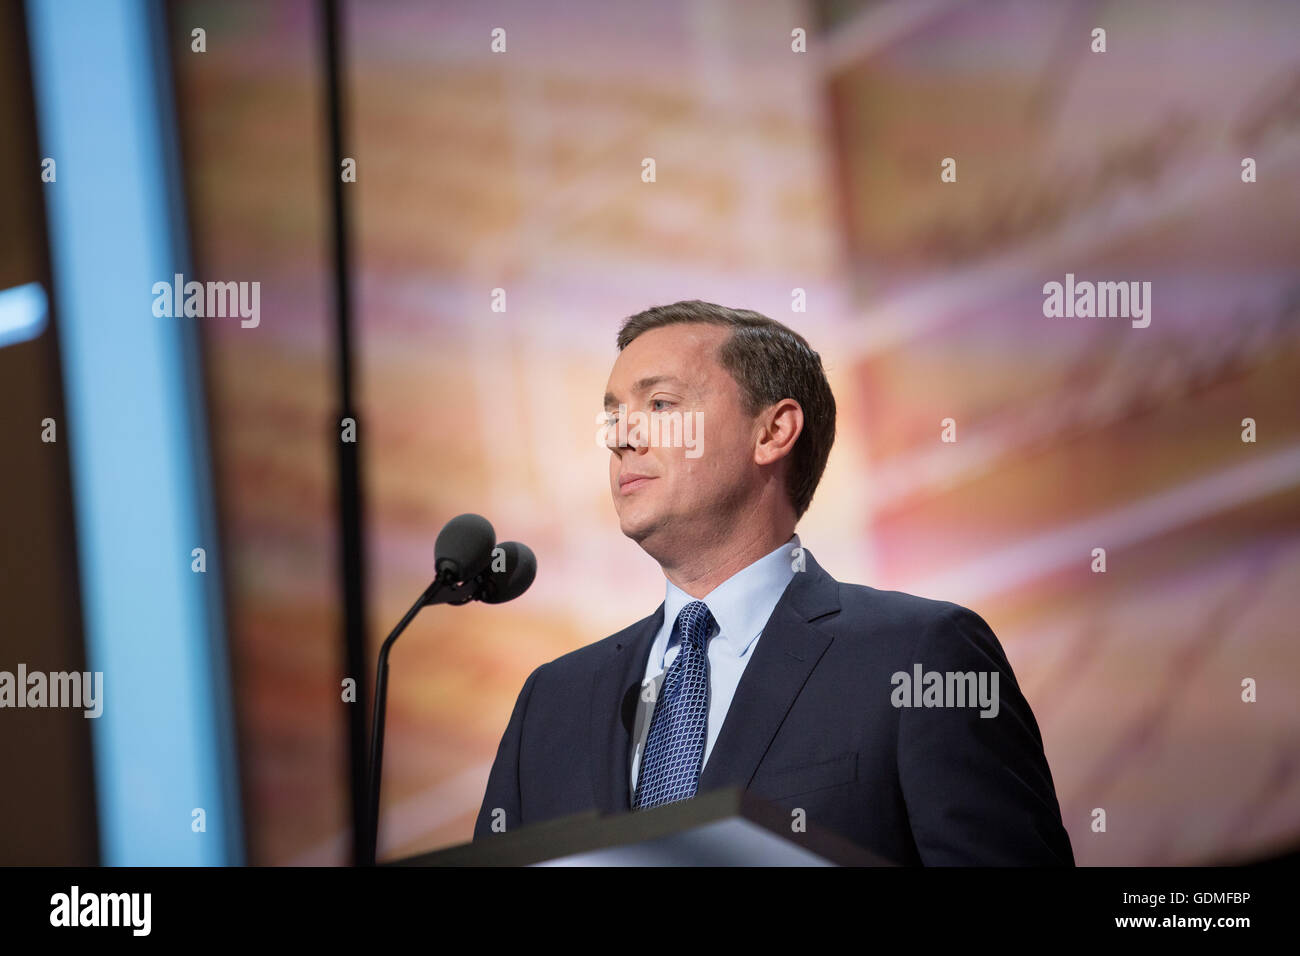 Cleveland, Ohio, USA. 19th July, 2016. National Rifle Administration (NRA) spokesman Chris Cox speaks on the second night of Republican National Convention. (Philip Scalia/Alamy Live News) Stock Photo